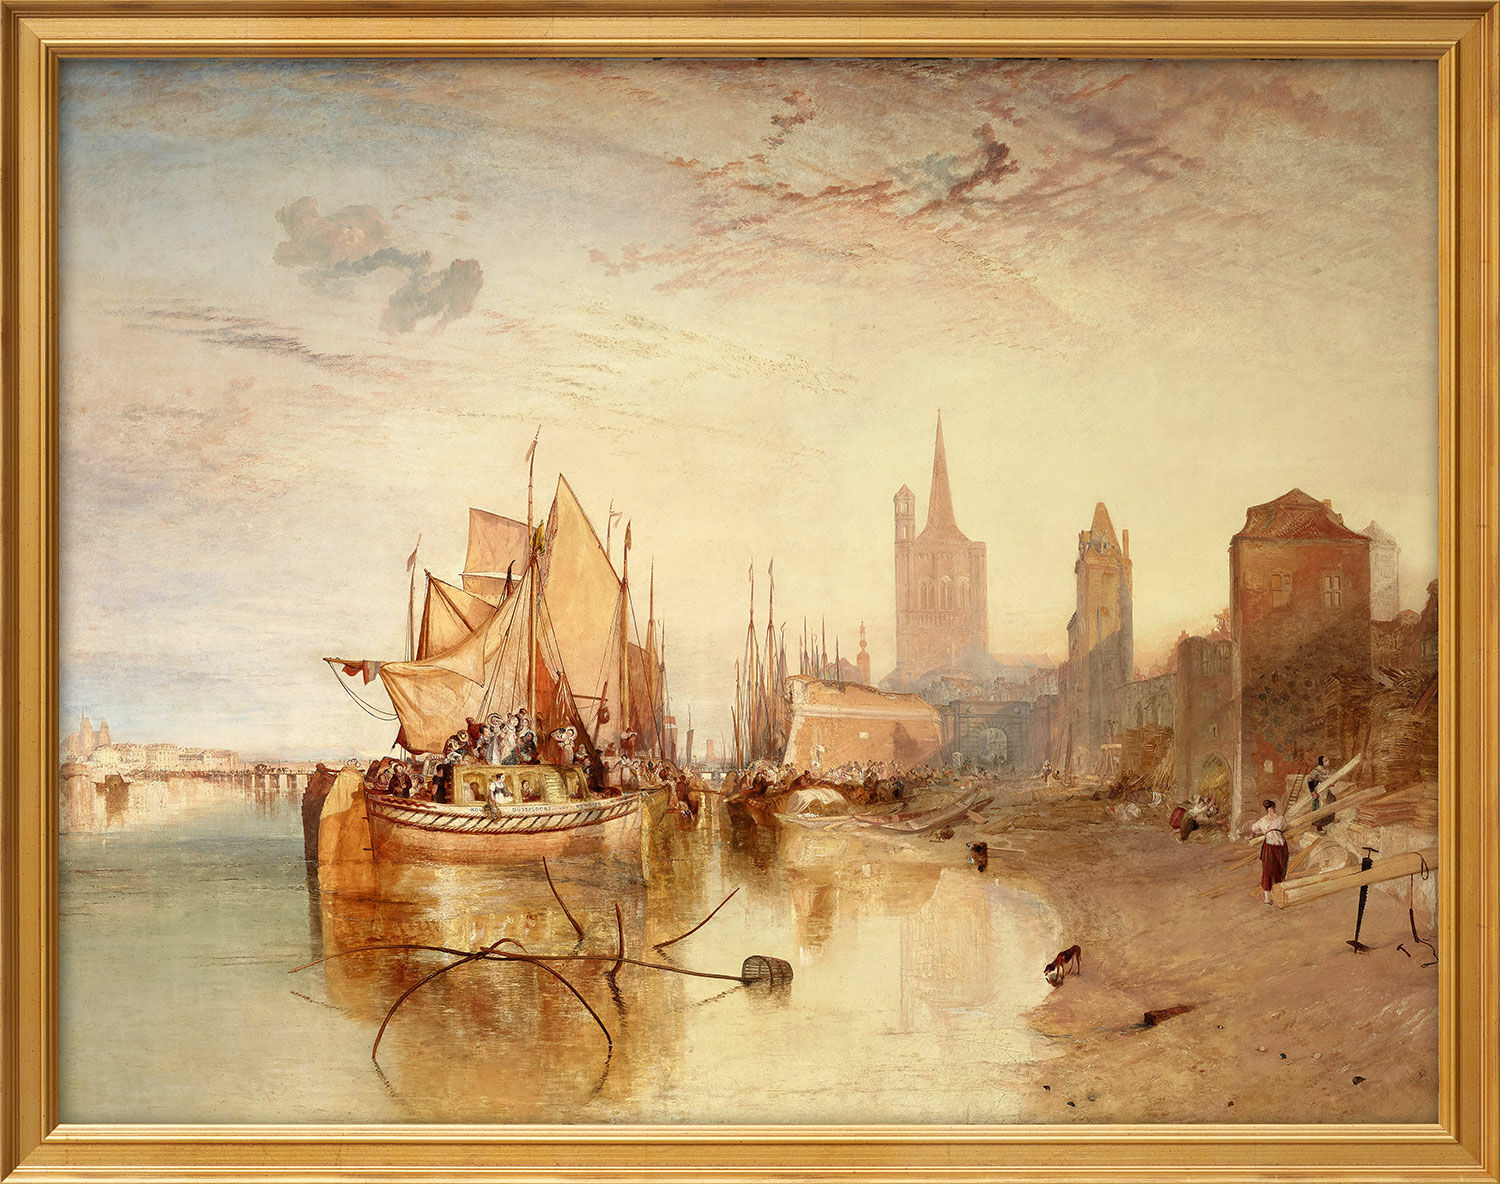 Picture "Cologne, the Arrival of a Packet-Boat: Evening" (1826), framed by William Turner